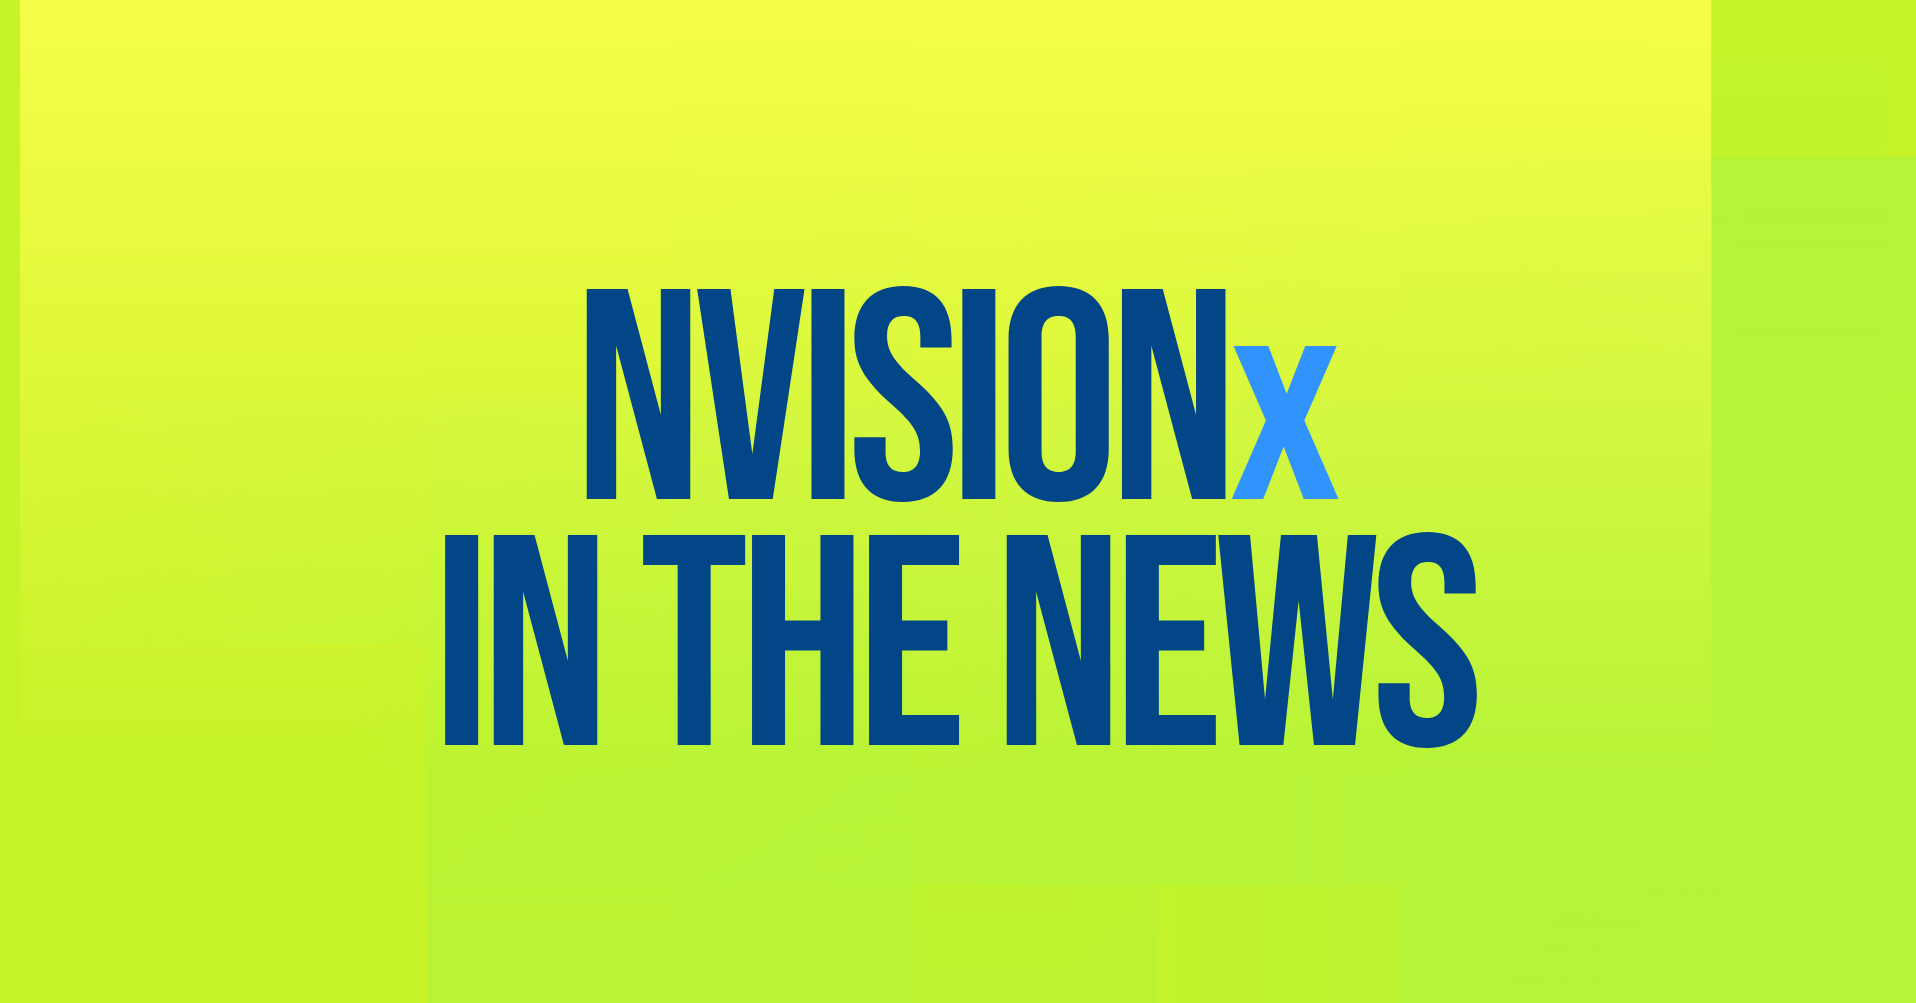 NVISIONx in the news header image